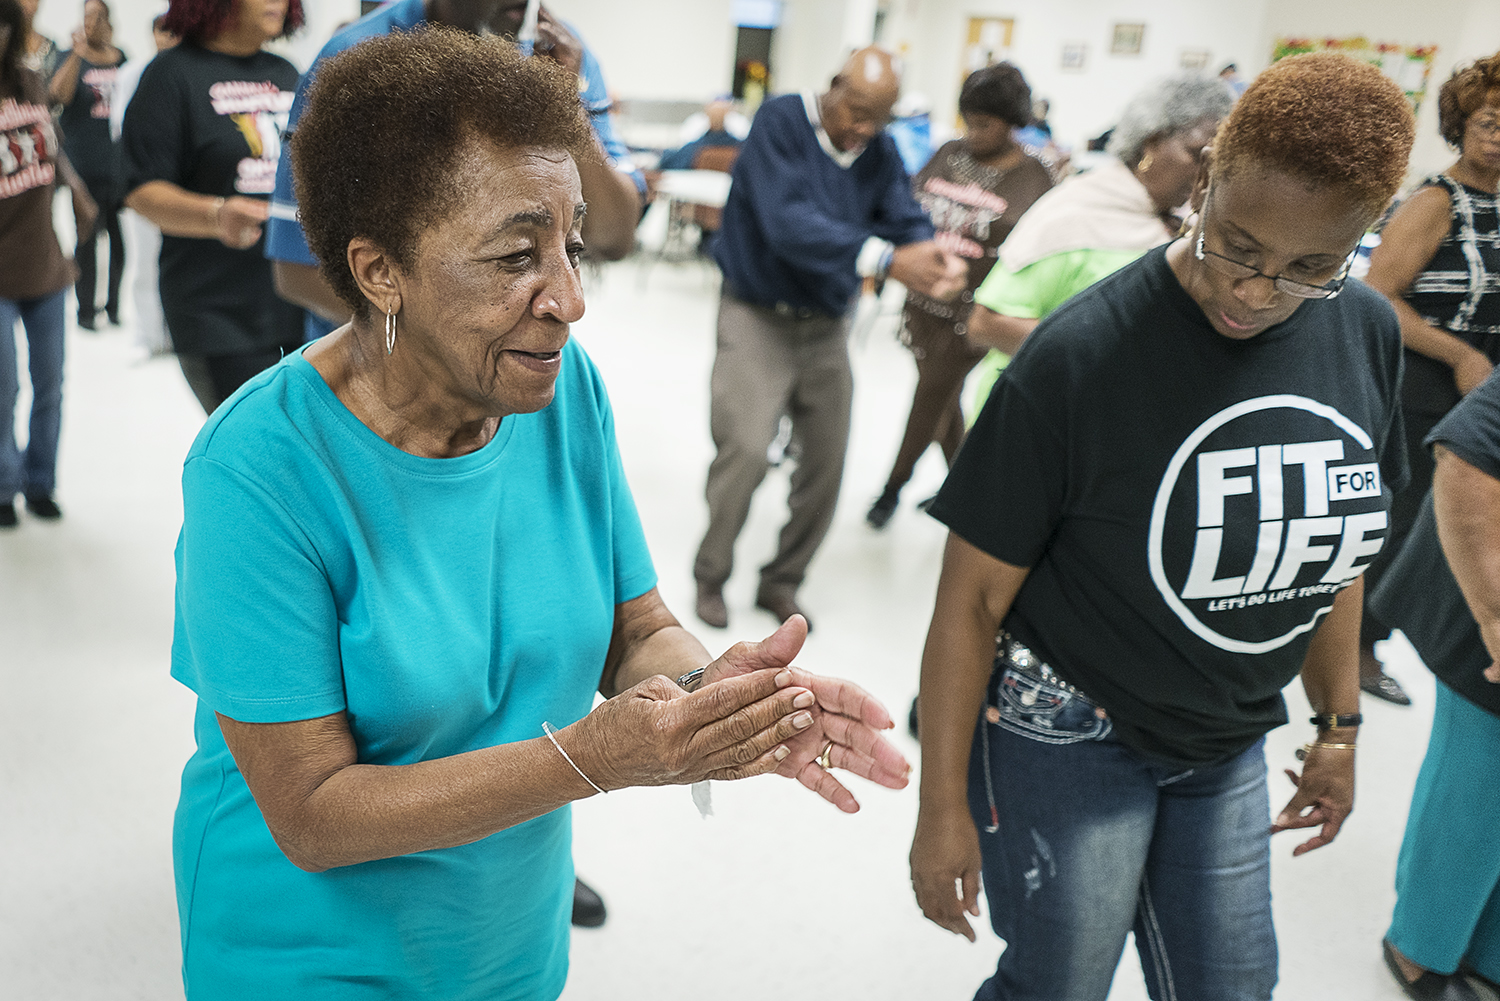 Flint residents Ruth Morris, 82, (left) and Queenella McGee, 66, dance together at the Hasselbring Senior Community Center. "I love coming because of these people," Morris says. "They're my sisters and brothers."